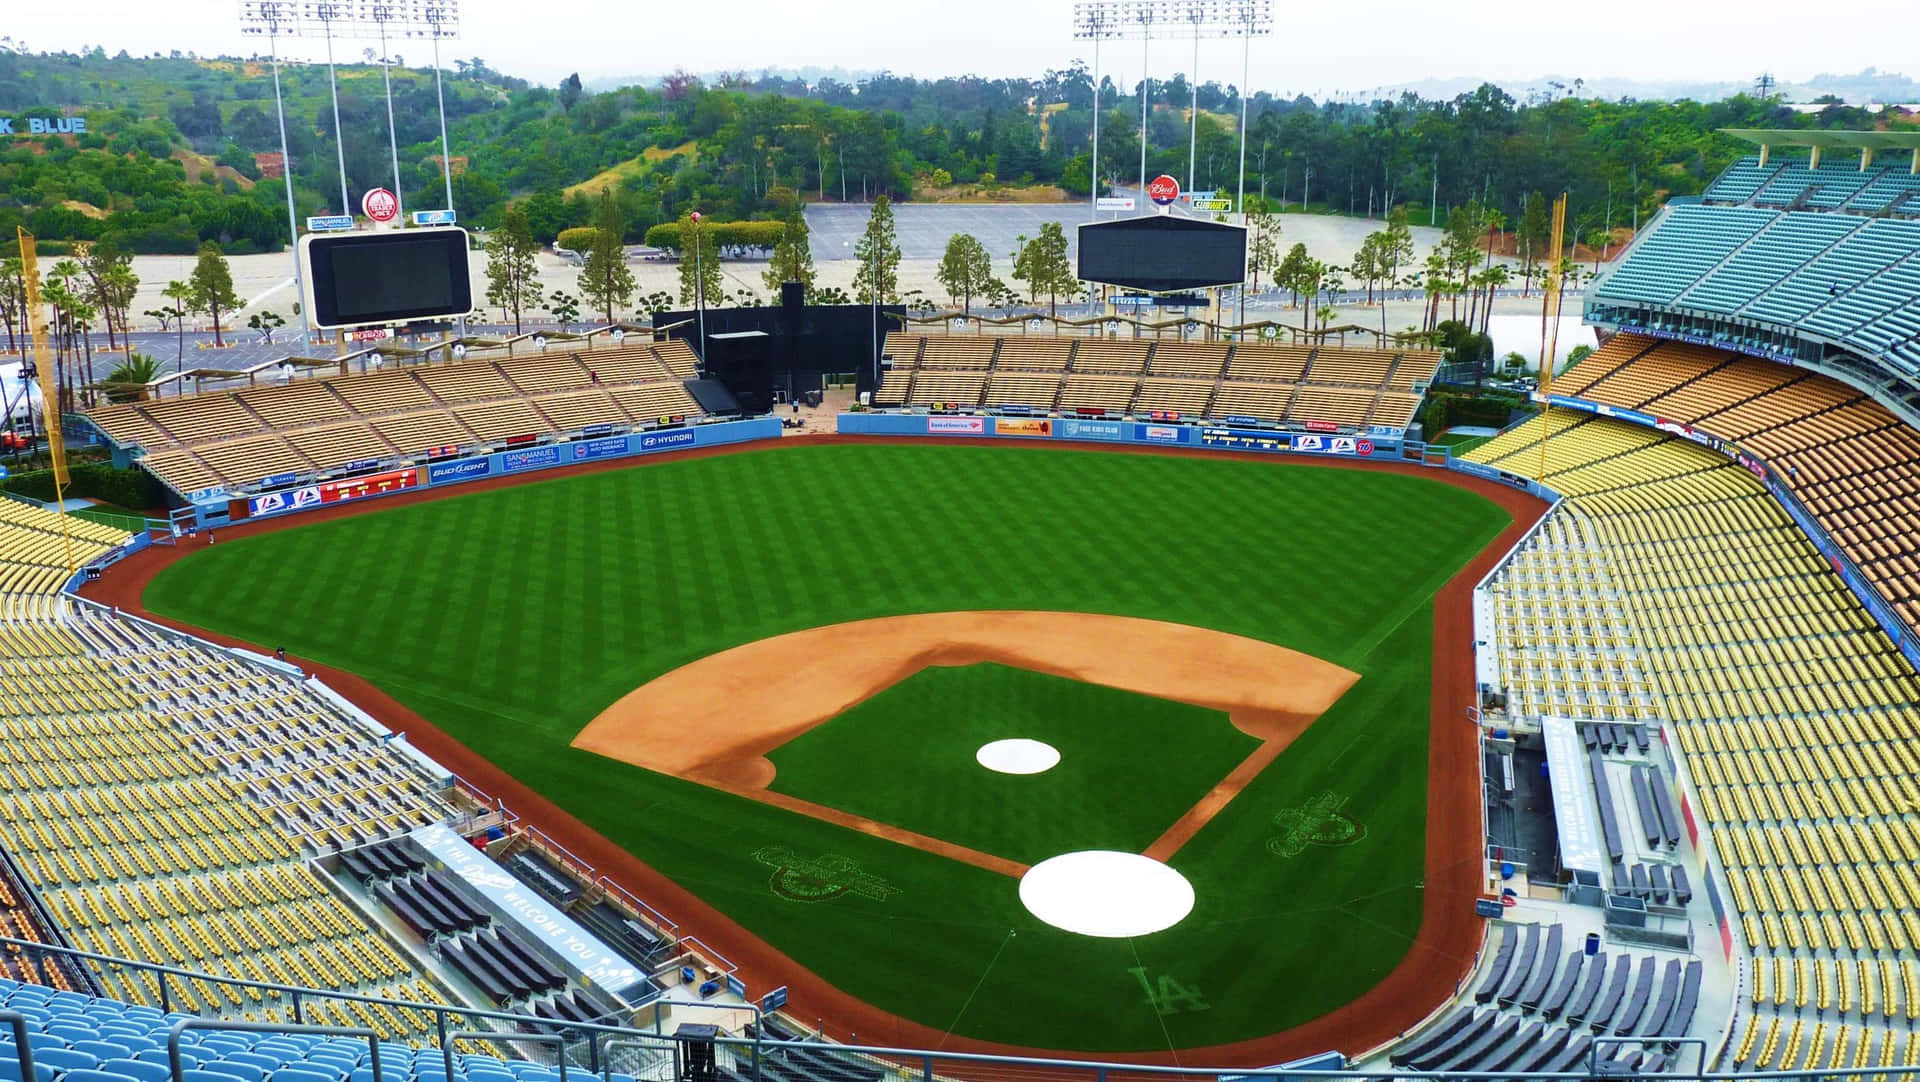 "Take a Trip to Dodger Stadium, Home of the Los Angeles Dodgers" Wallpaper